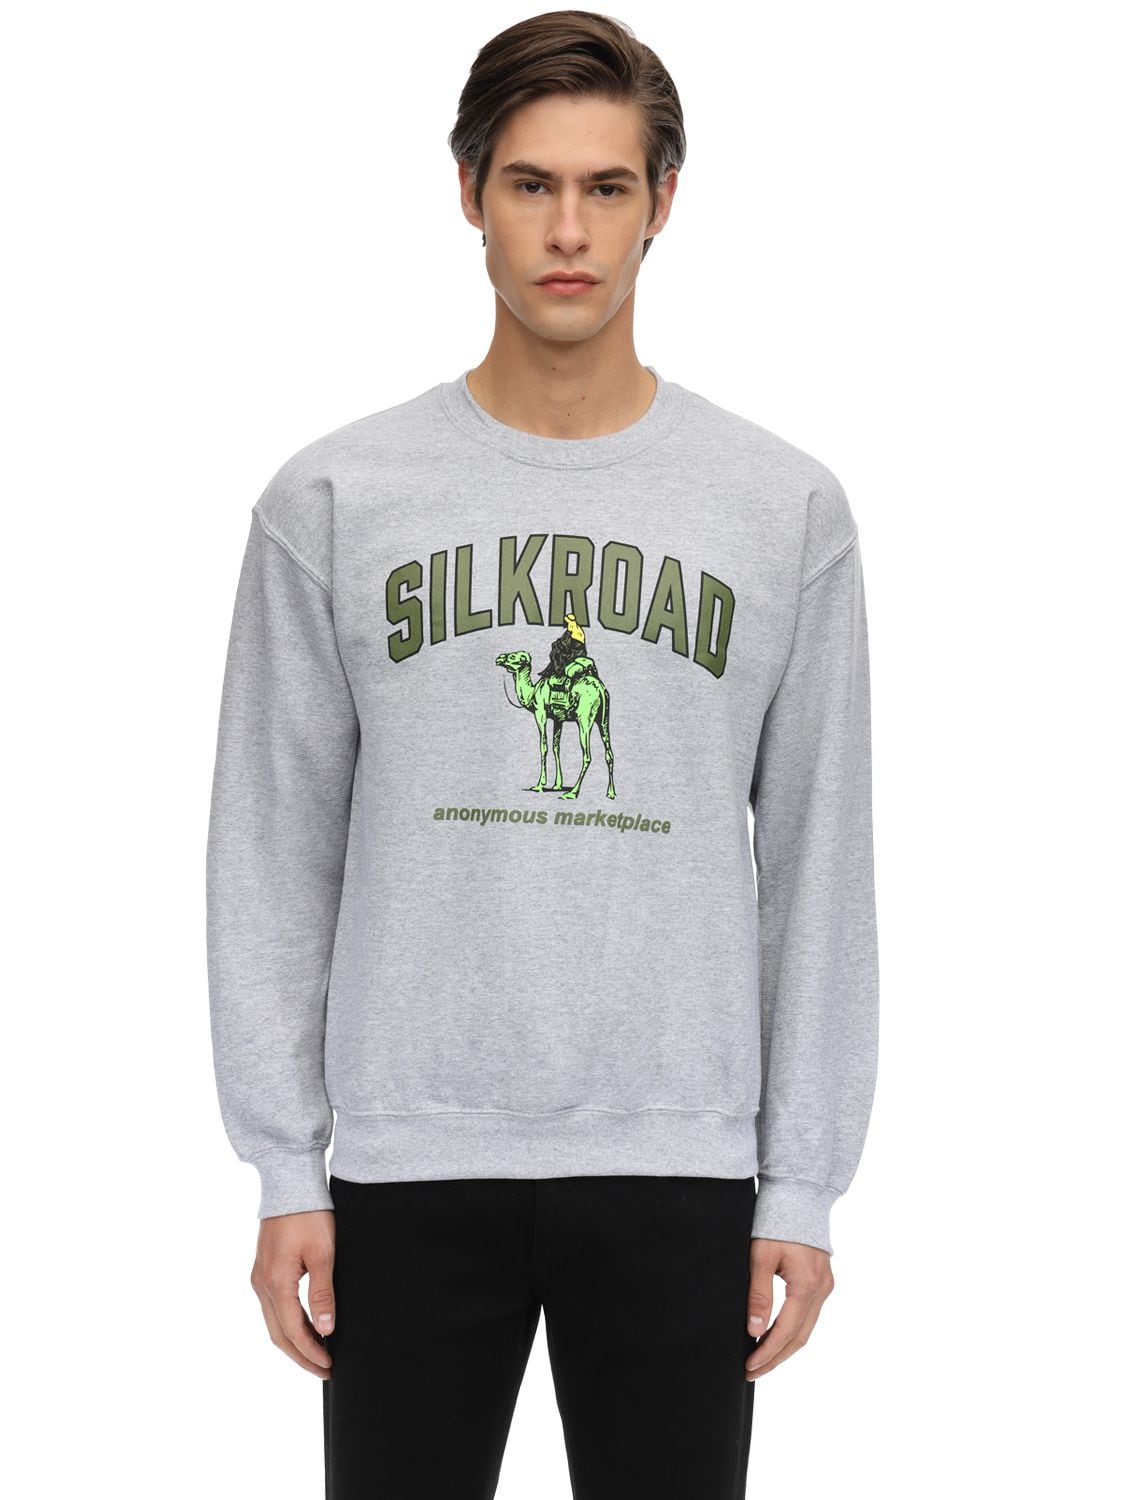 1800-paradise The Road Less Traveled Cotton Sweatshirt In Heather Grey